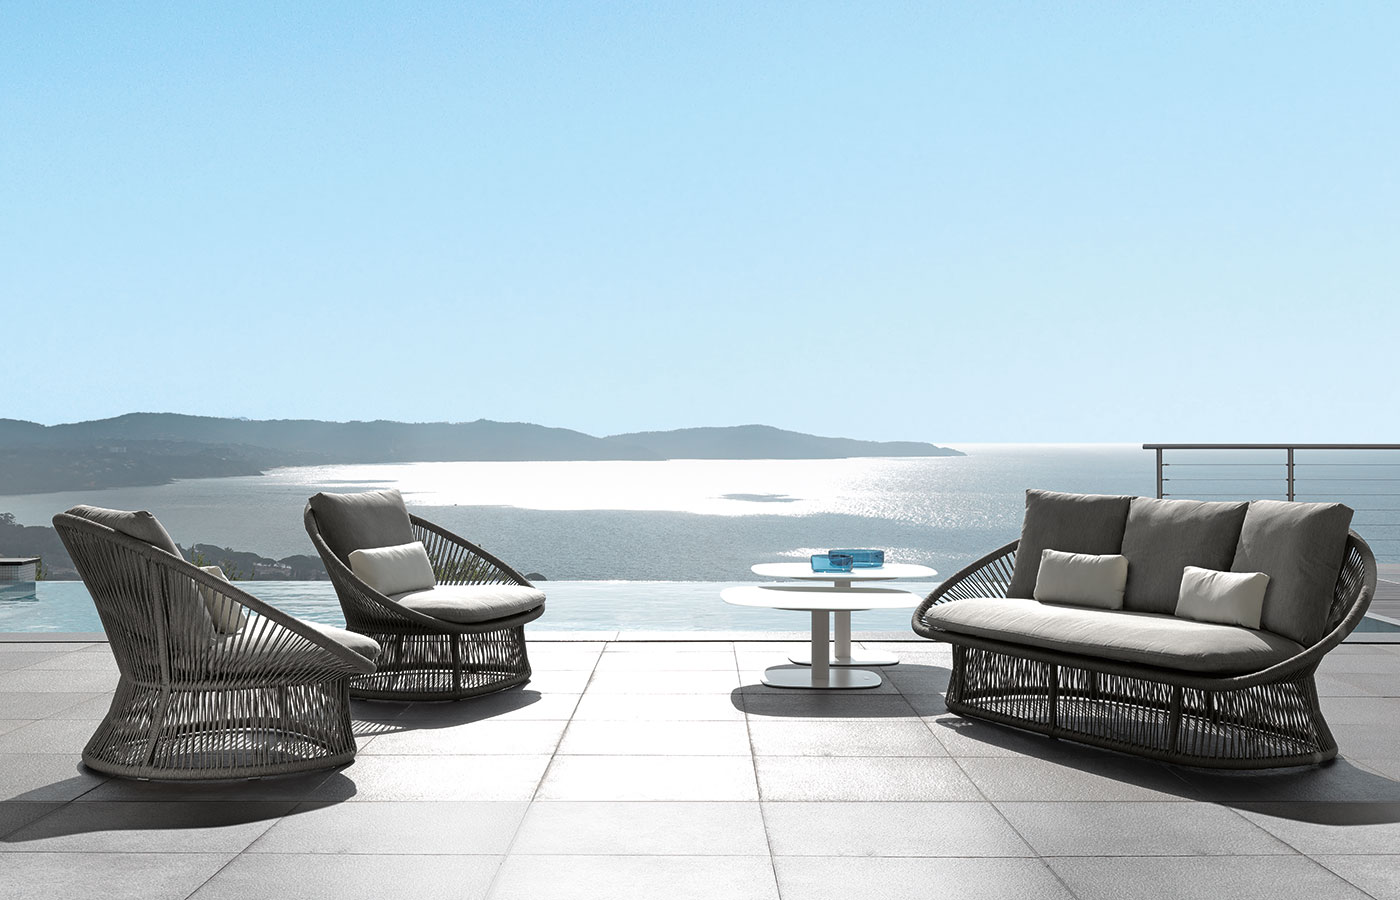 Garden furniture for luxurious villas, yachts, hotels. Outdoor sofa in a grey aluminium frame and weave fabric. Online shopping and free delivery.